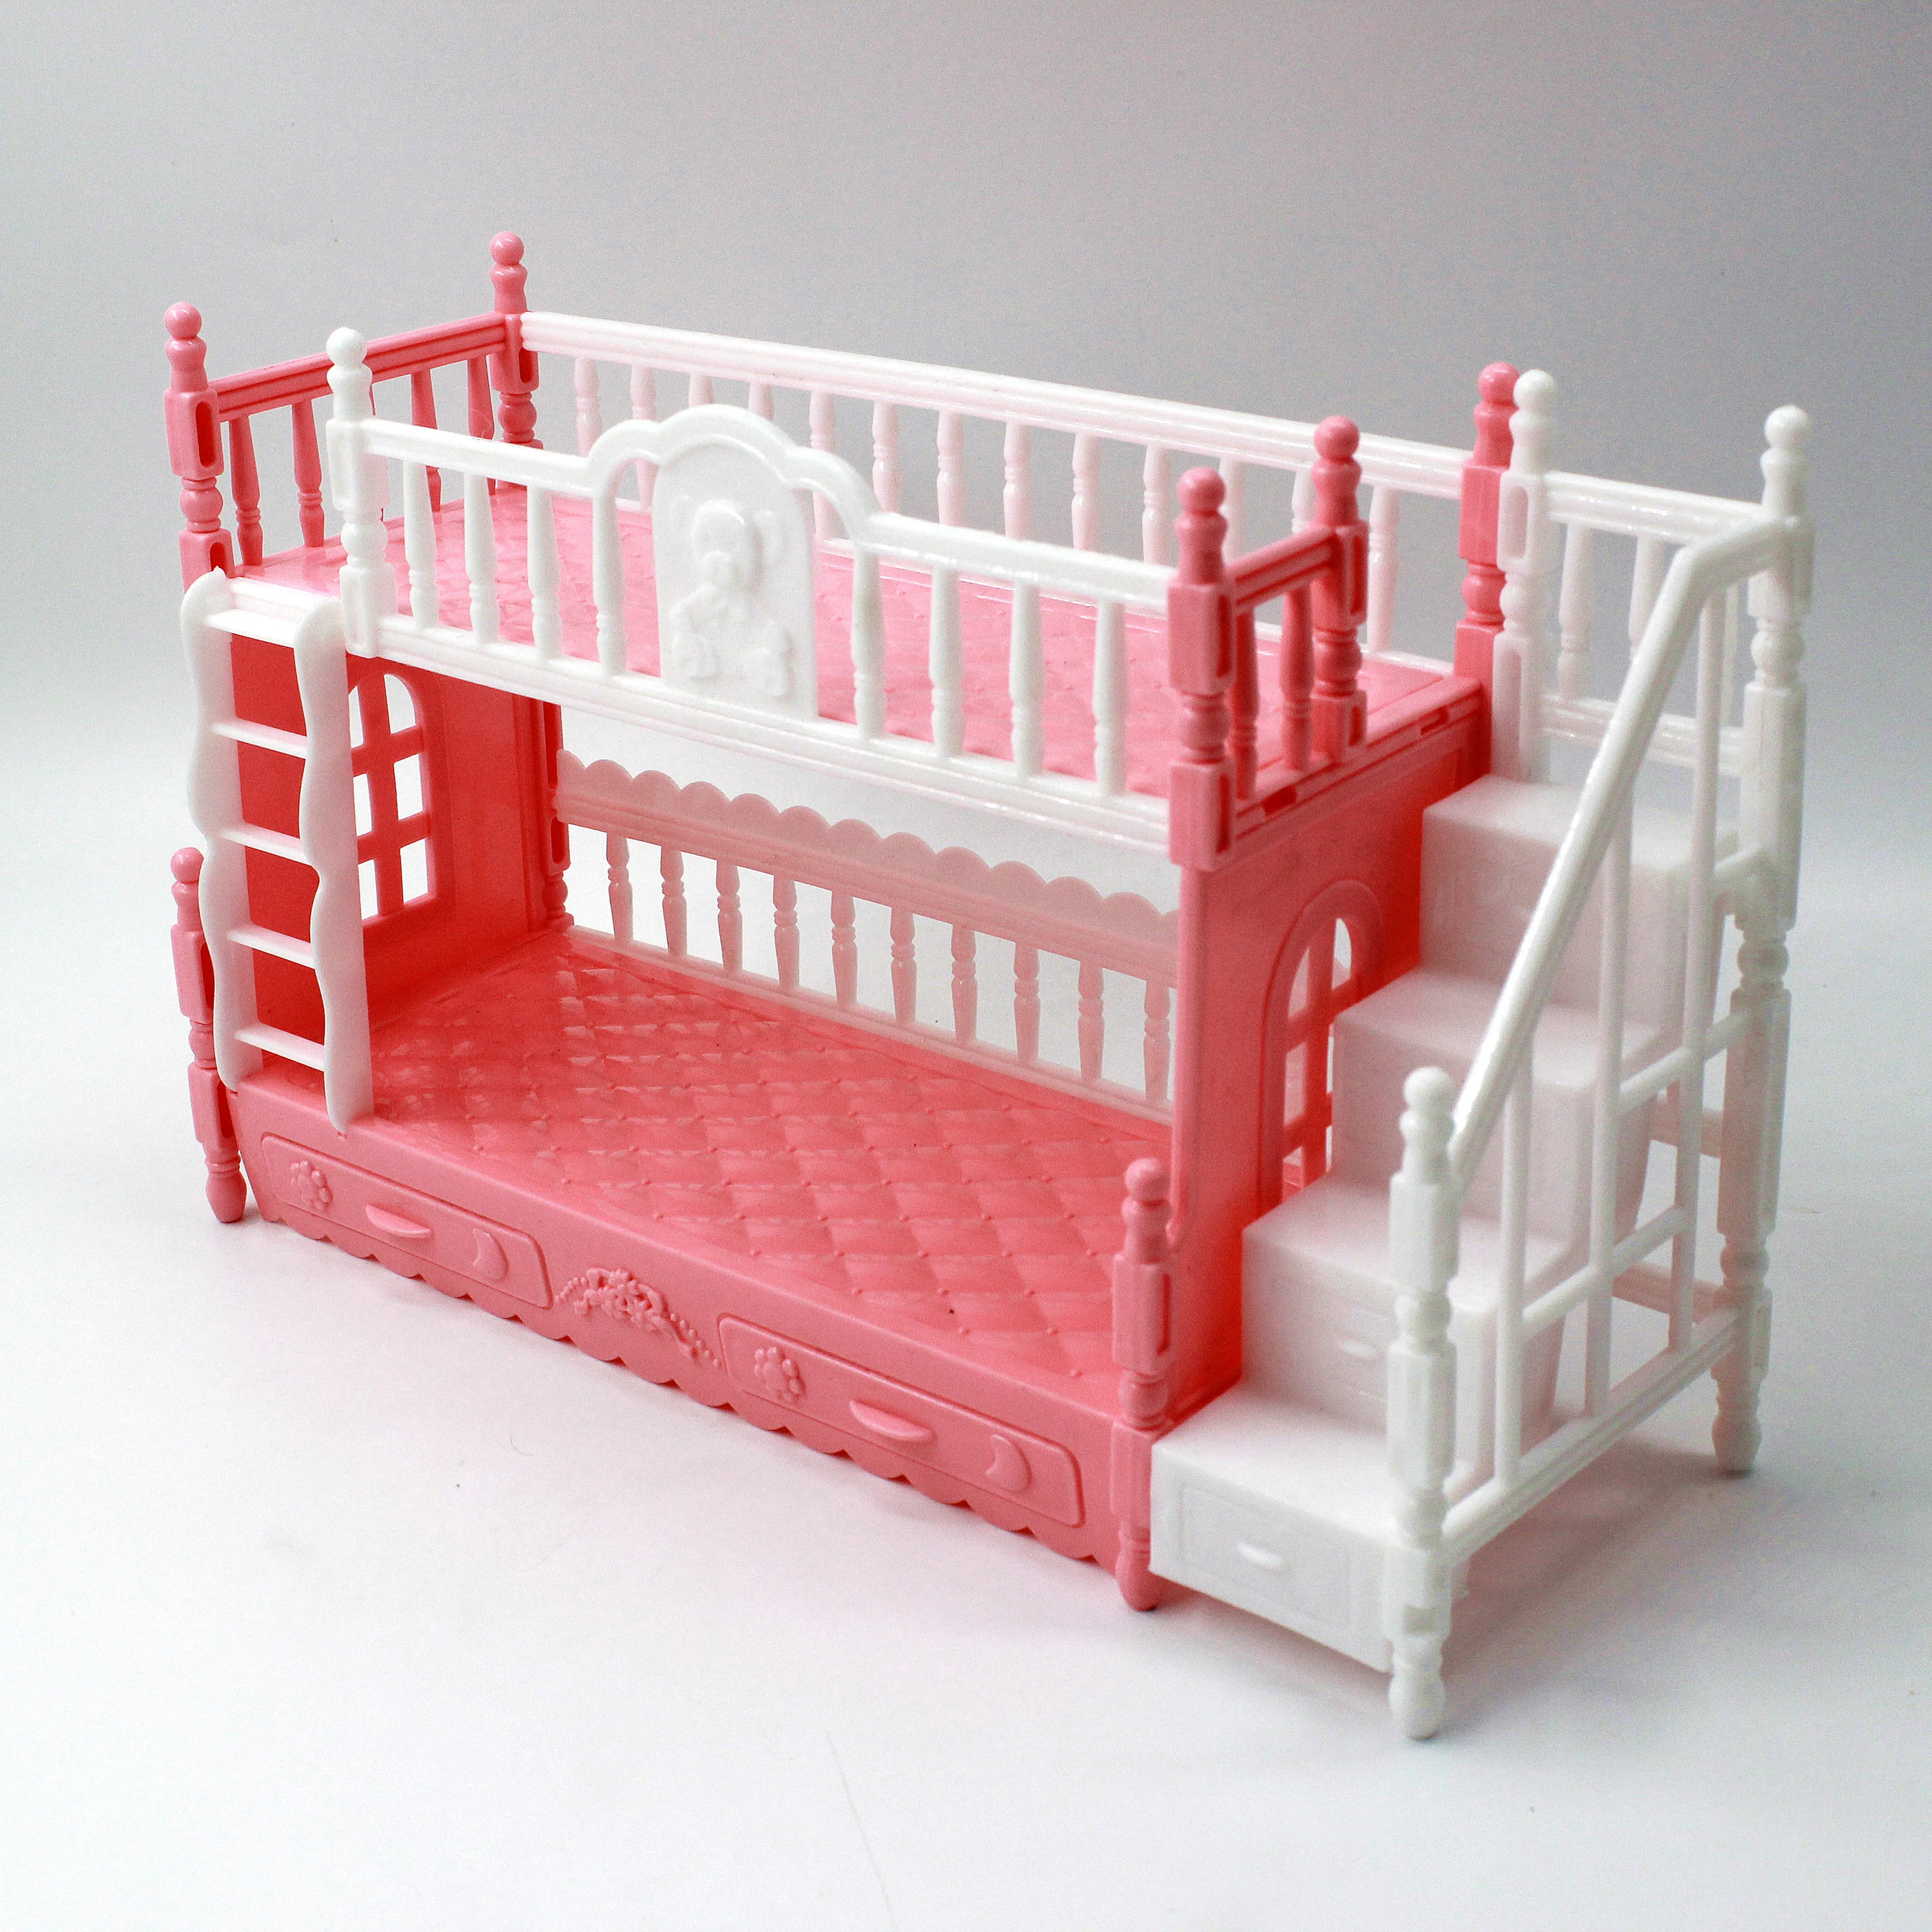 BJD Doll Children Play House For Barbie Doll Accessories Simulation European Furniture Princess Double Bed With Stairs Toys